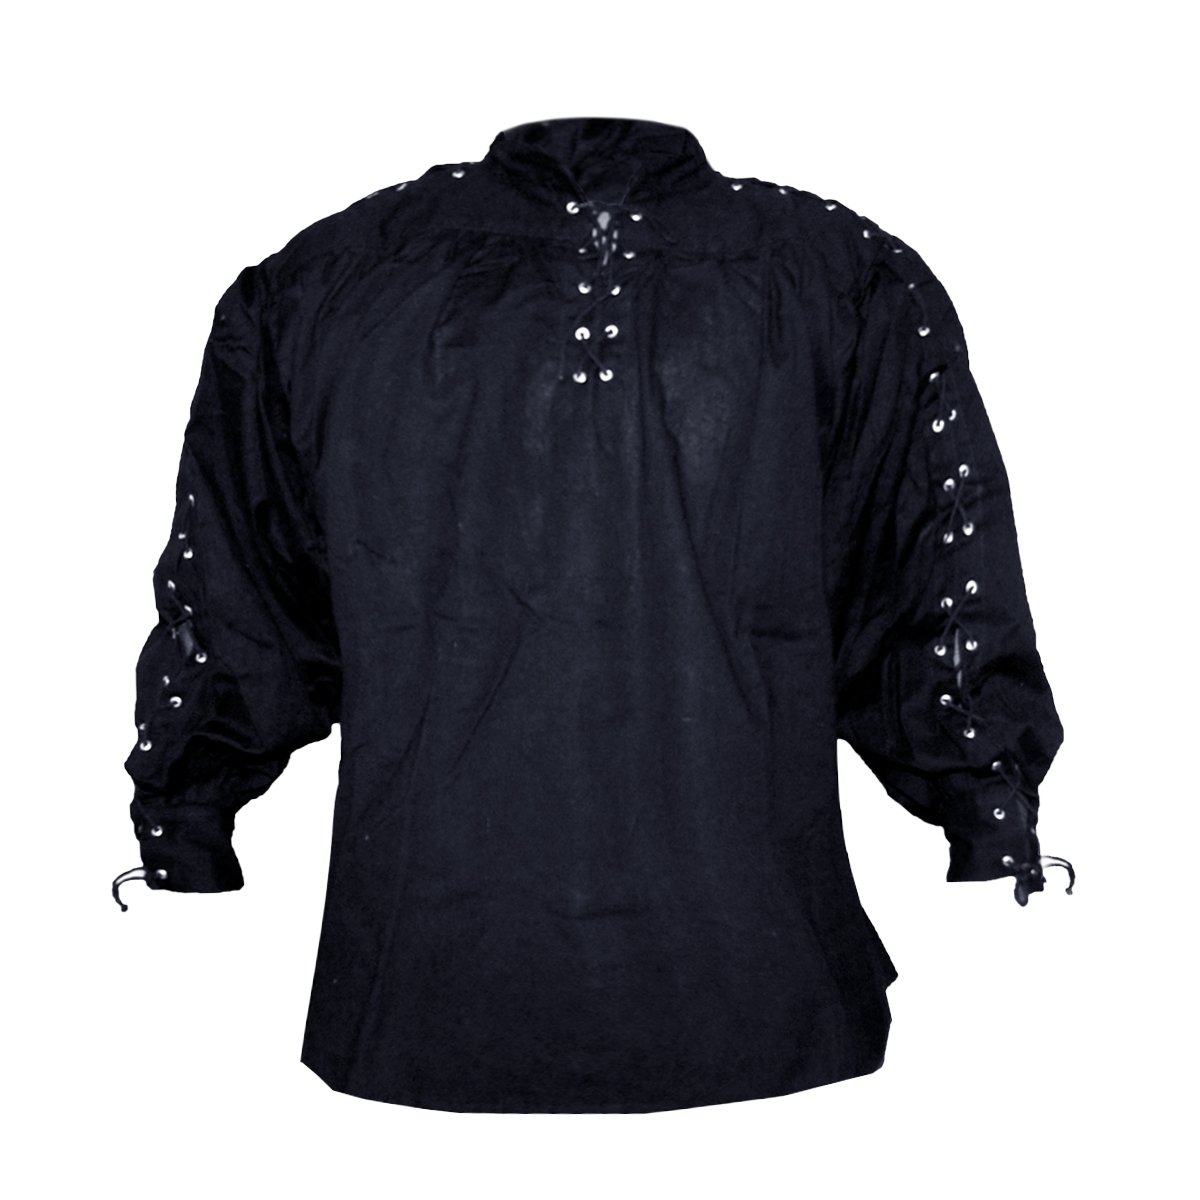 Collarless cotton shirt (laced neck & sleeves) - black, size S